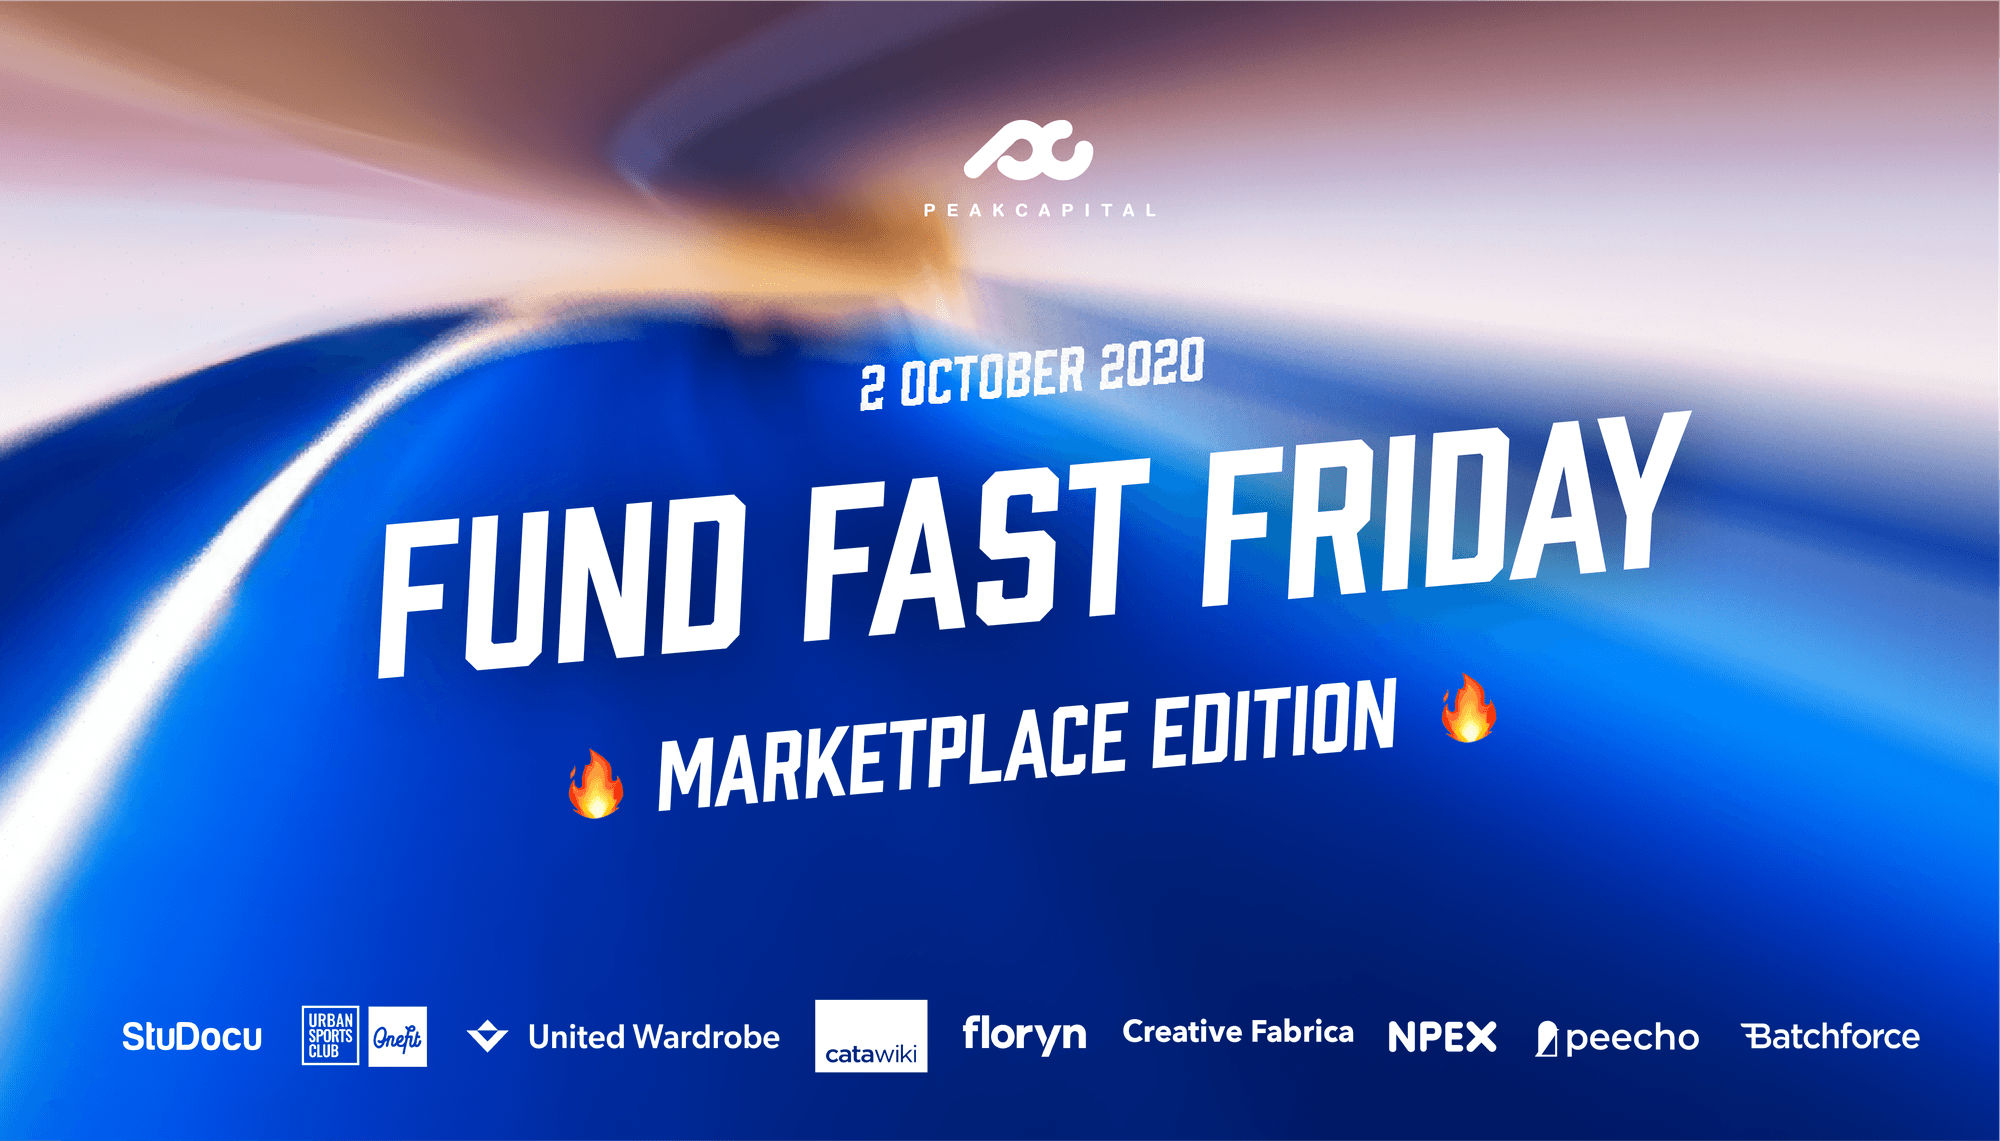 The online event for marketplace founders. Fast track your fundraising.